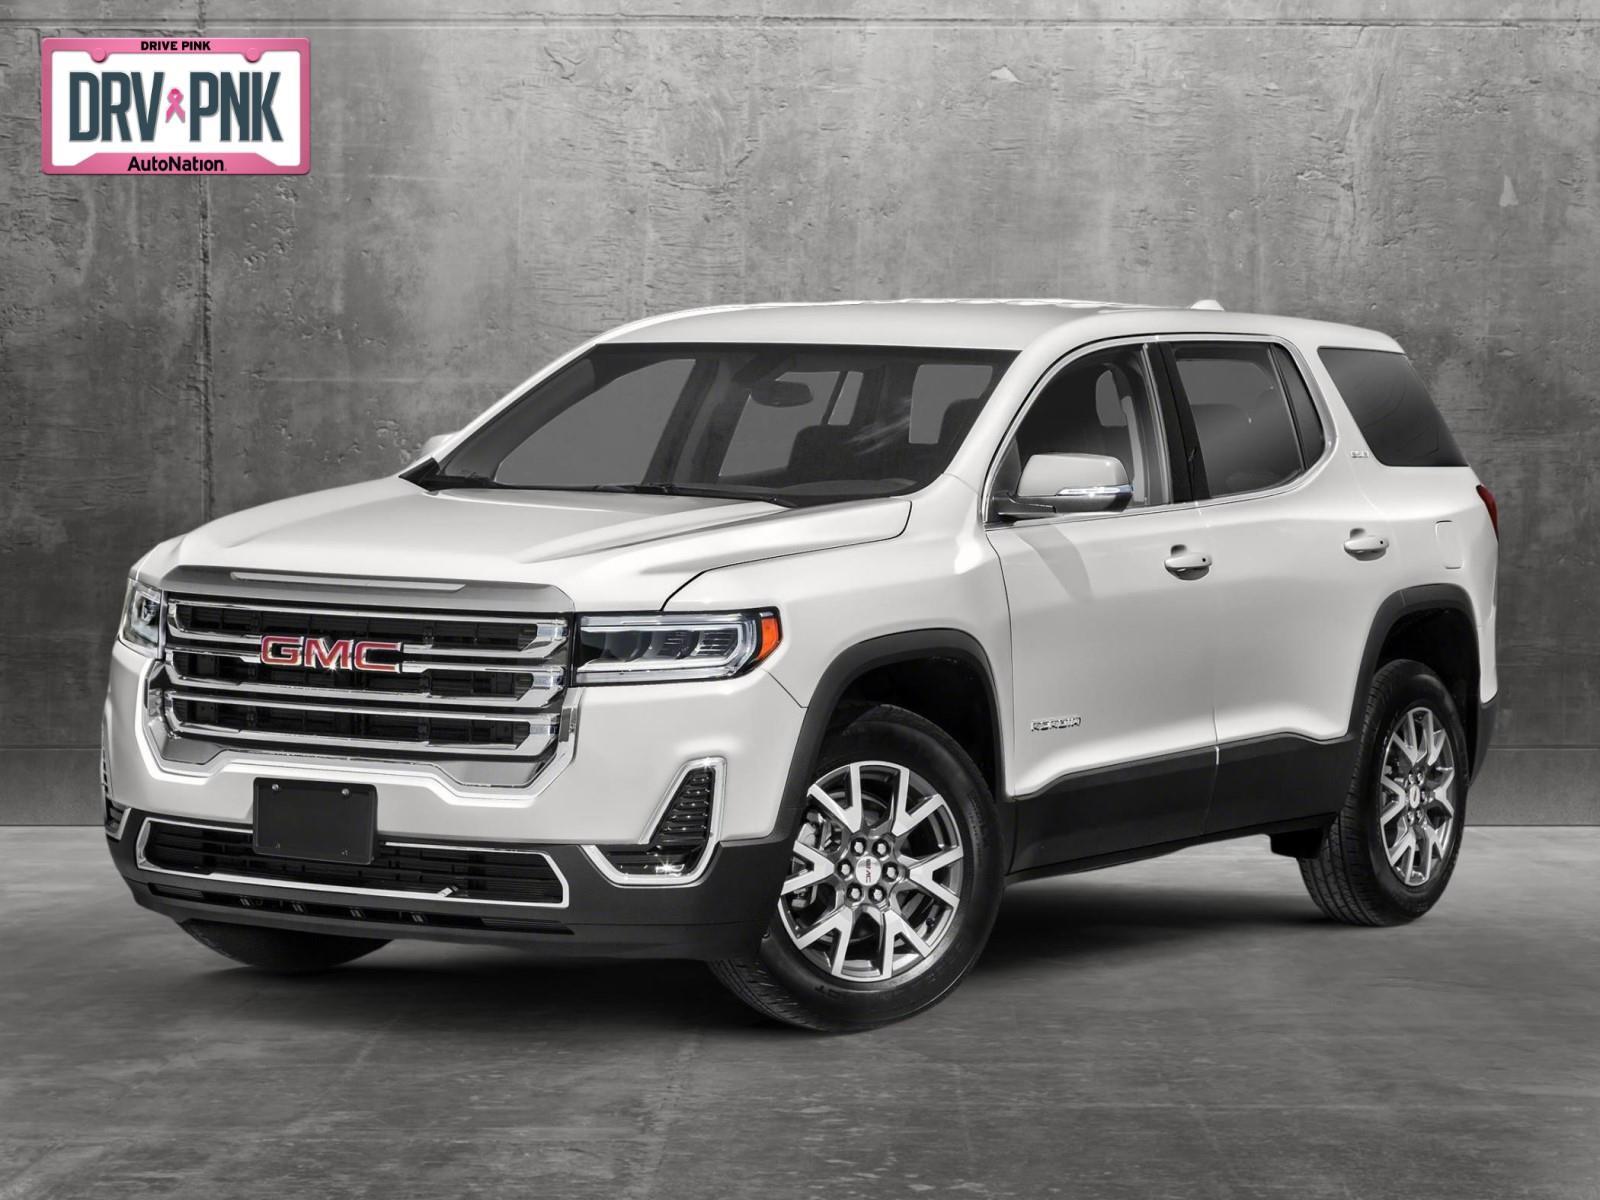 NEW 2023 GMC Acadia for sale in Lone Tree, CO 80124 - AutoNation